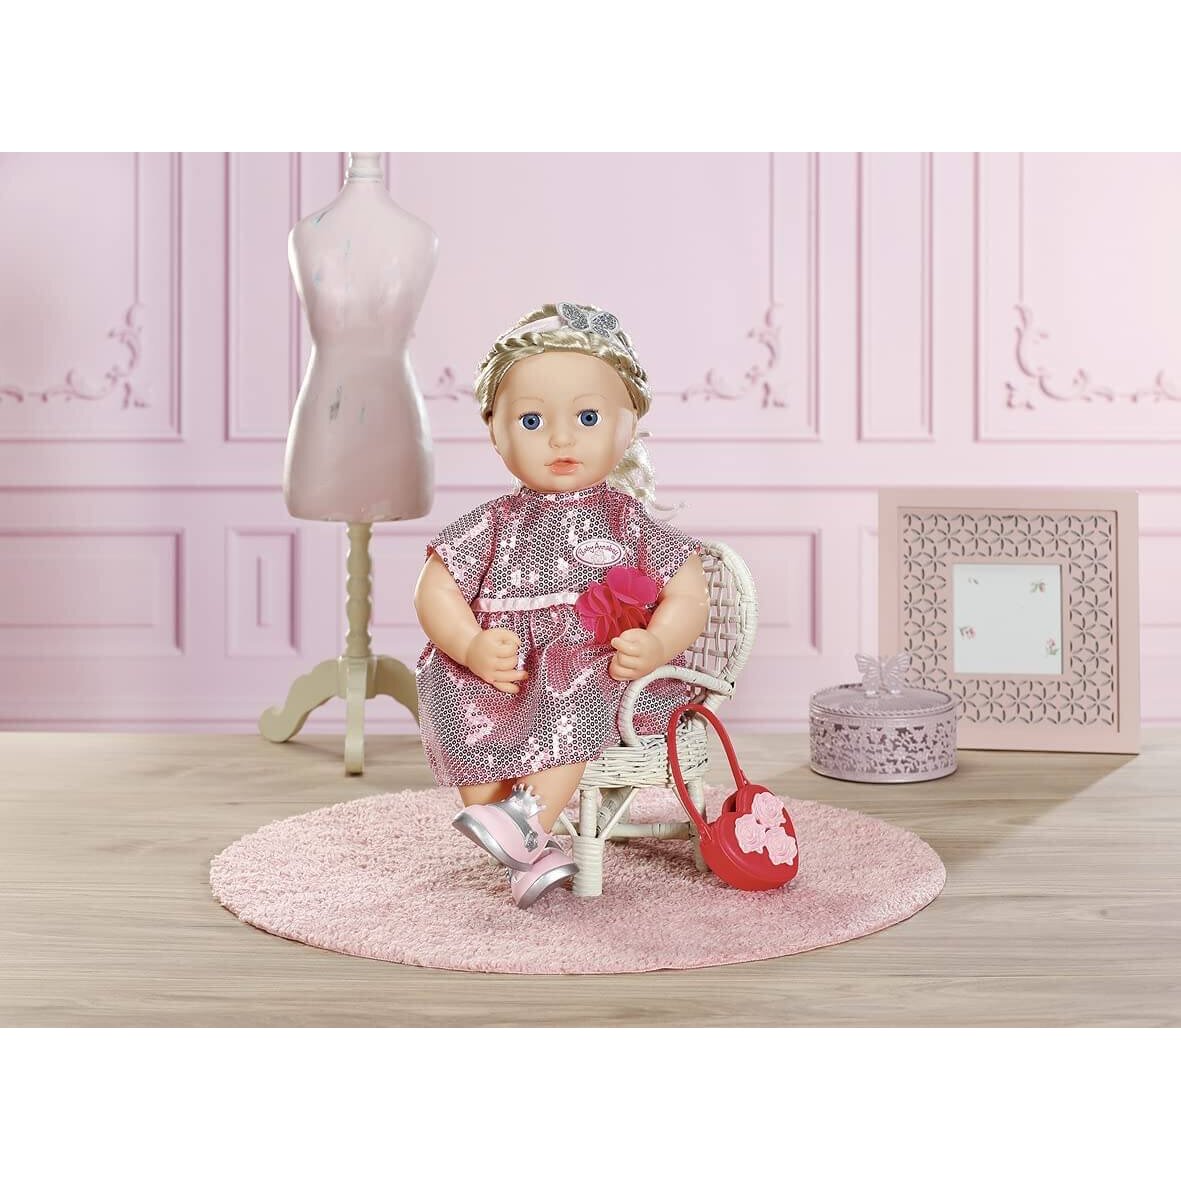 Baby Annabell Deluxe Glamour 43cm Doll Outfit